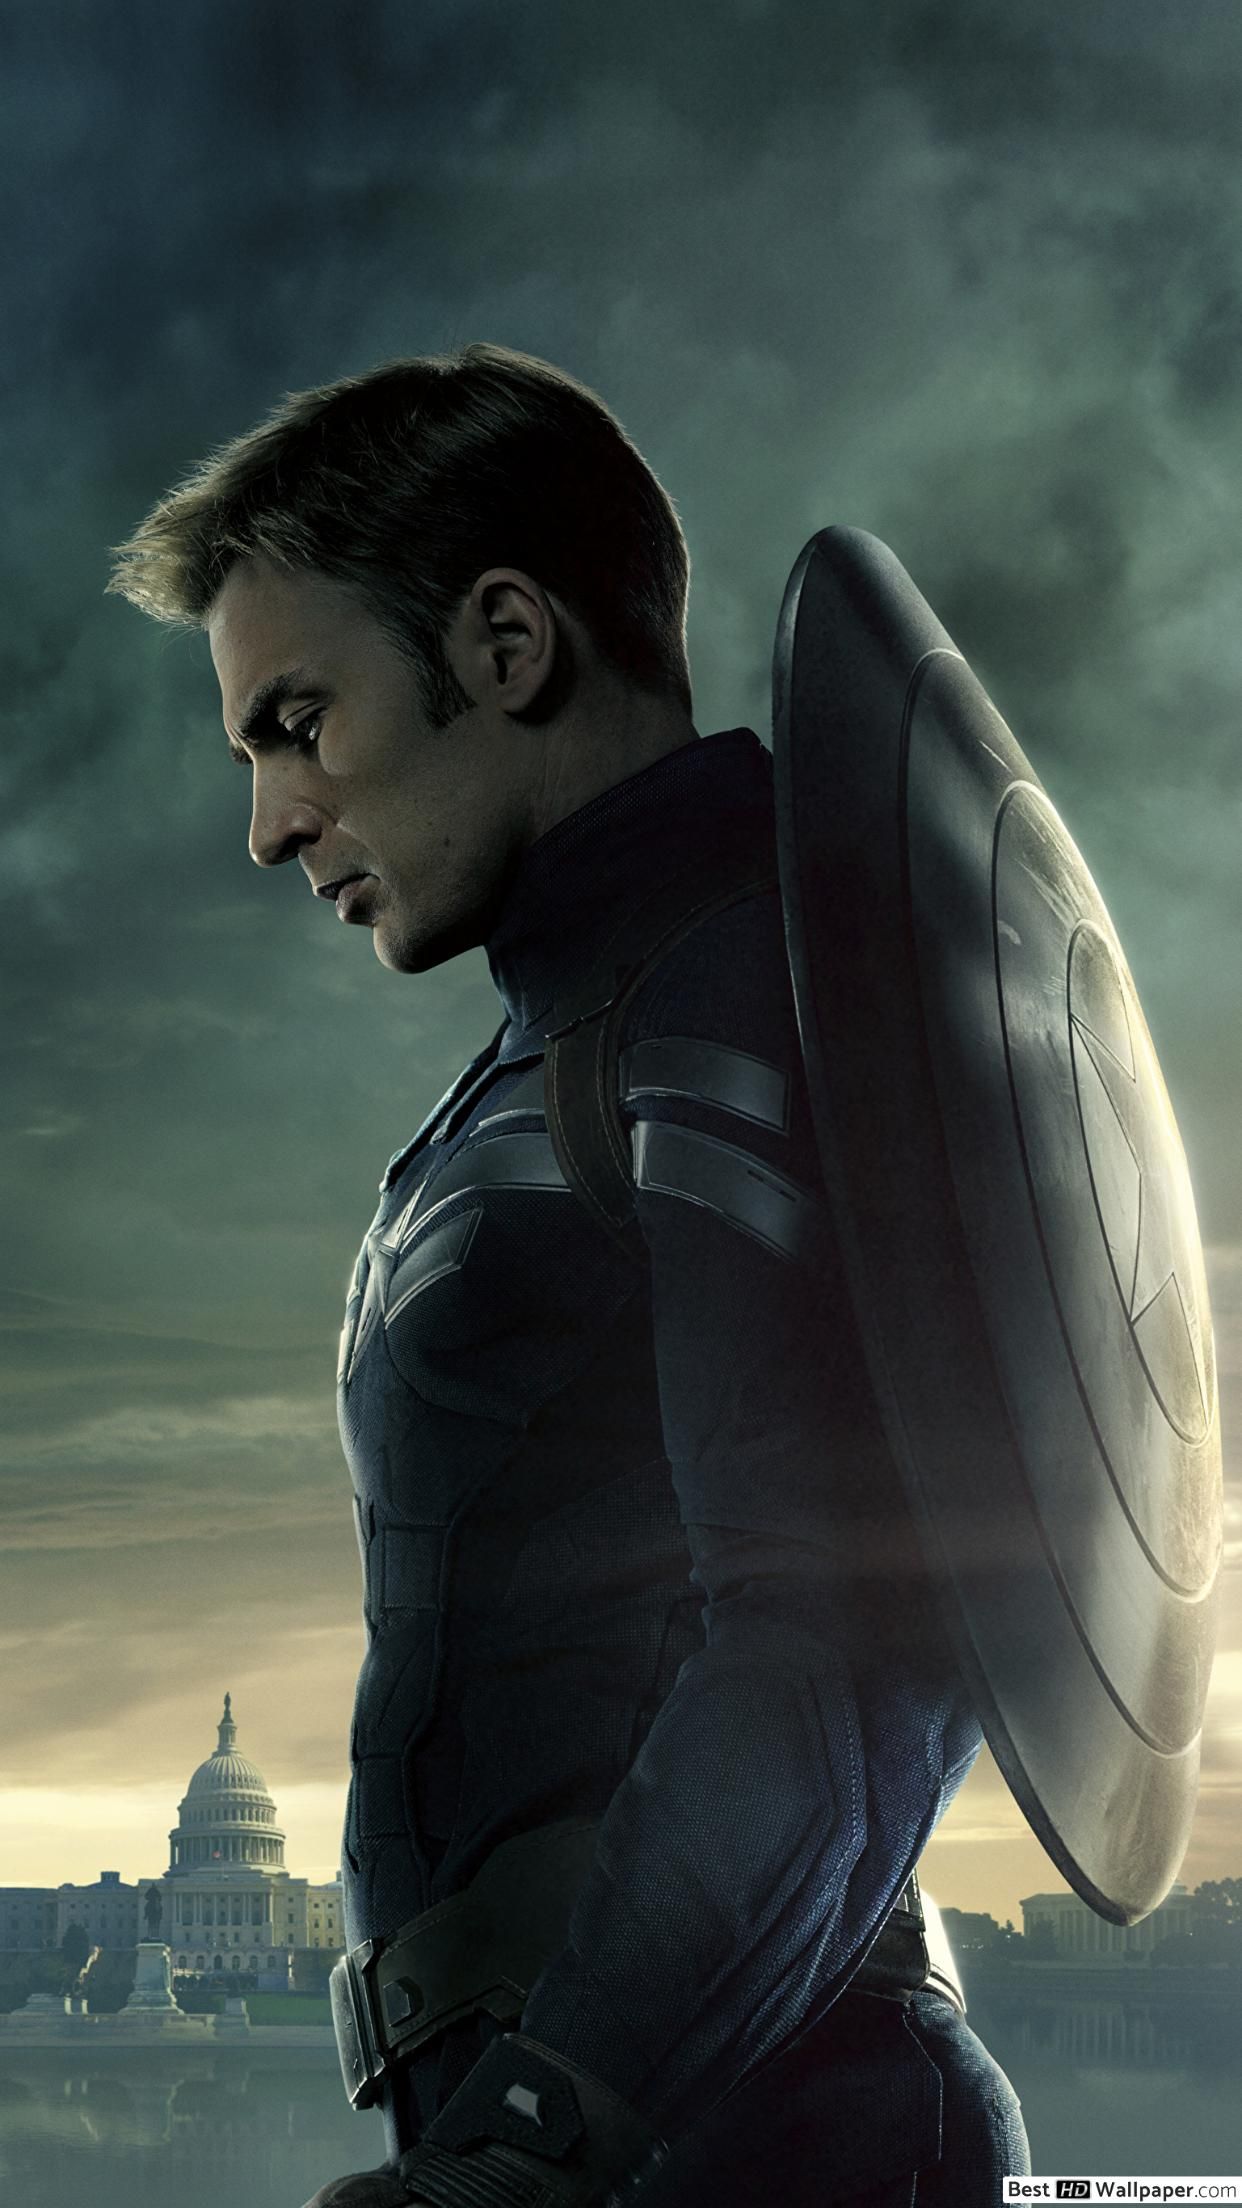 Captain America: The Winter Soldier Evans as Captain America HD wallpaper download